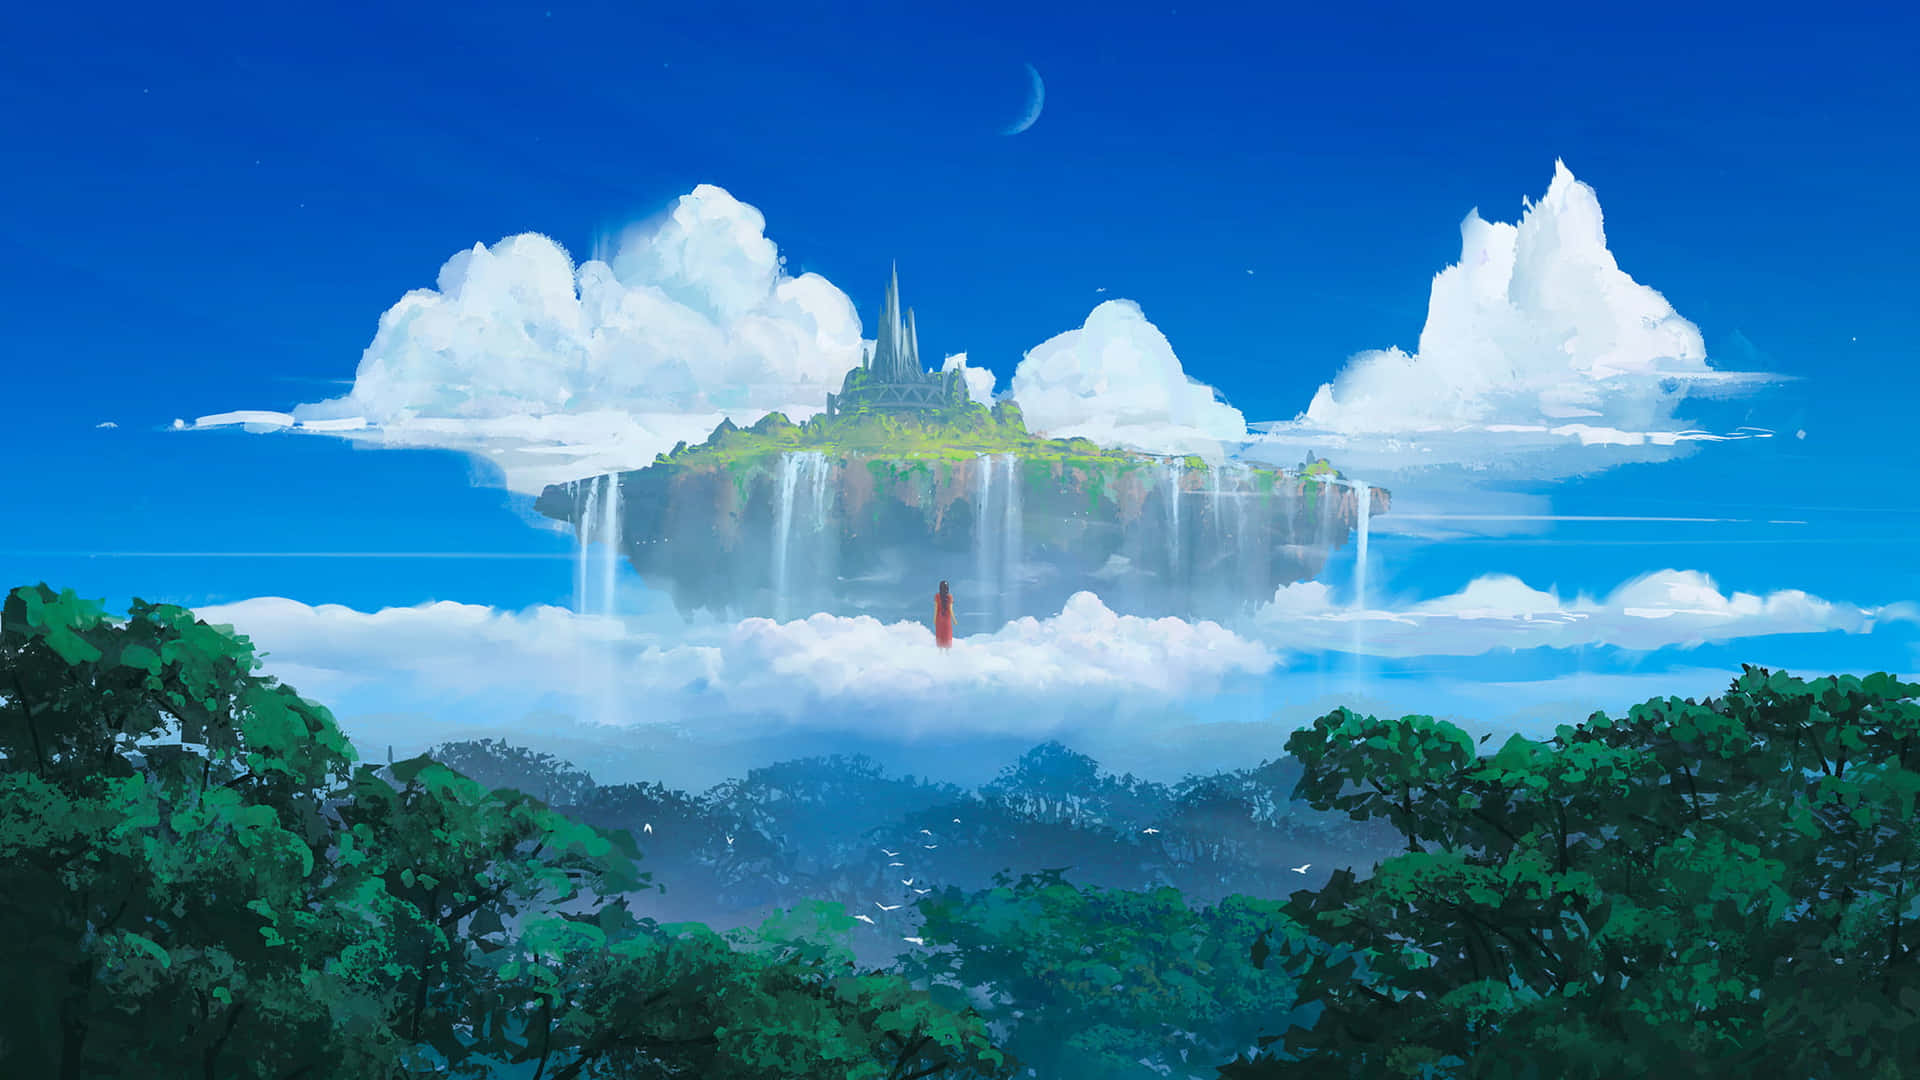 Explore the mysterious, magical Floating Island